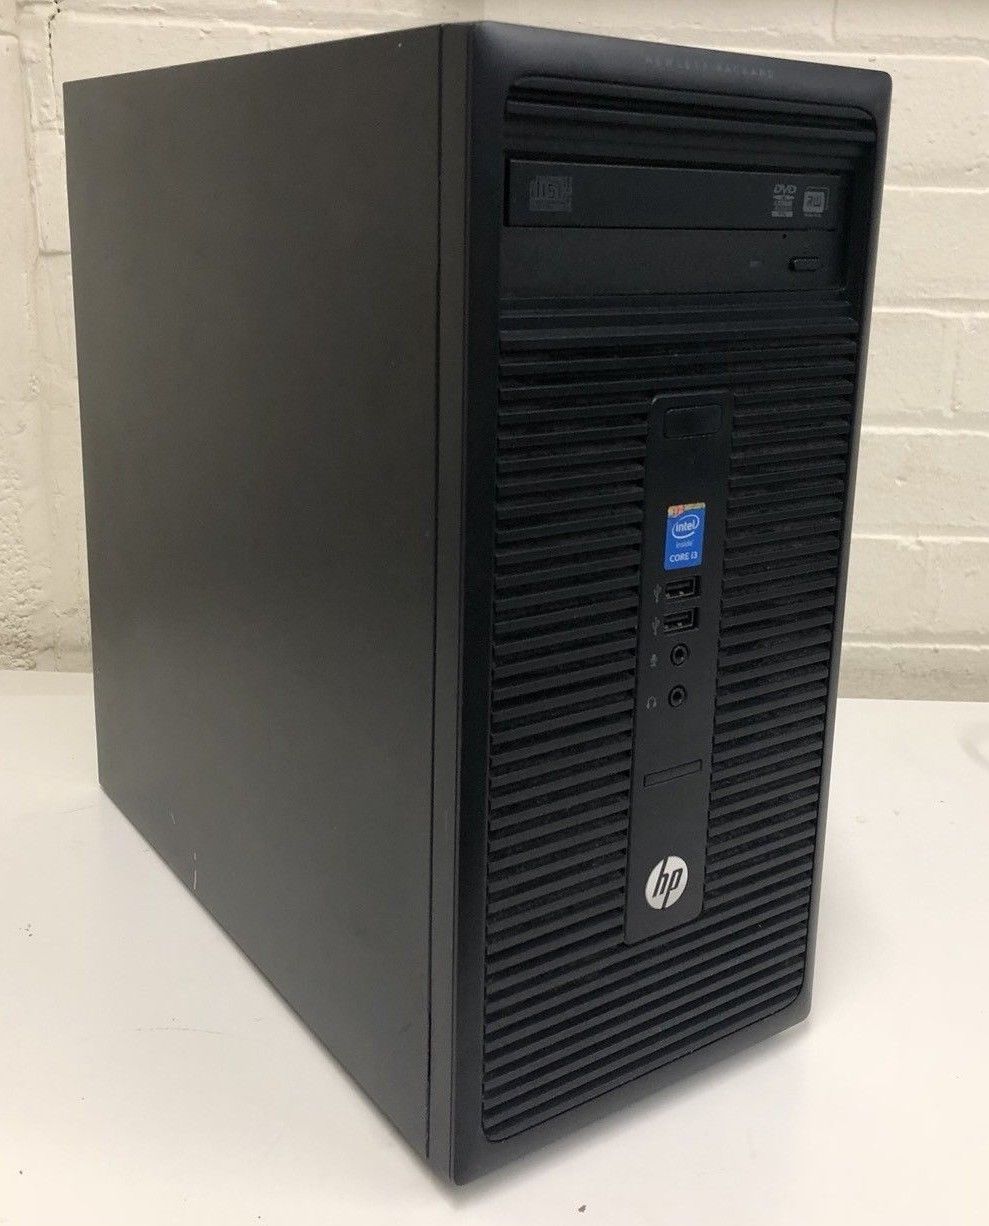 HP 280 g1 MT Business PC